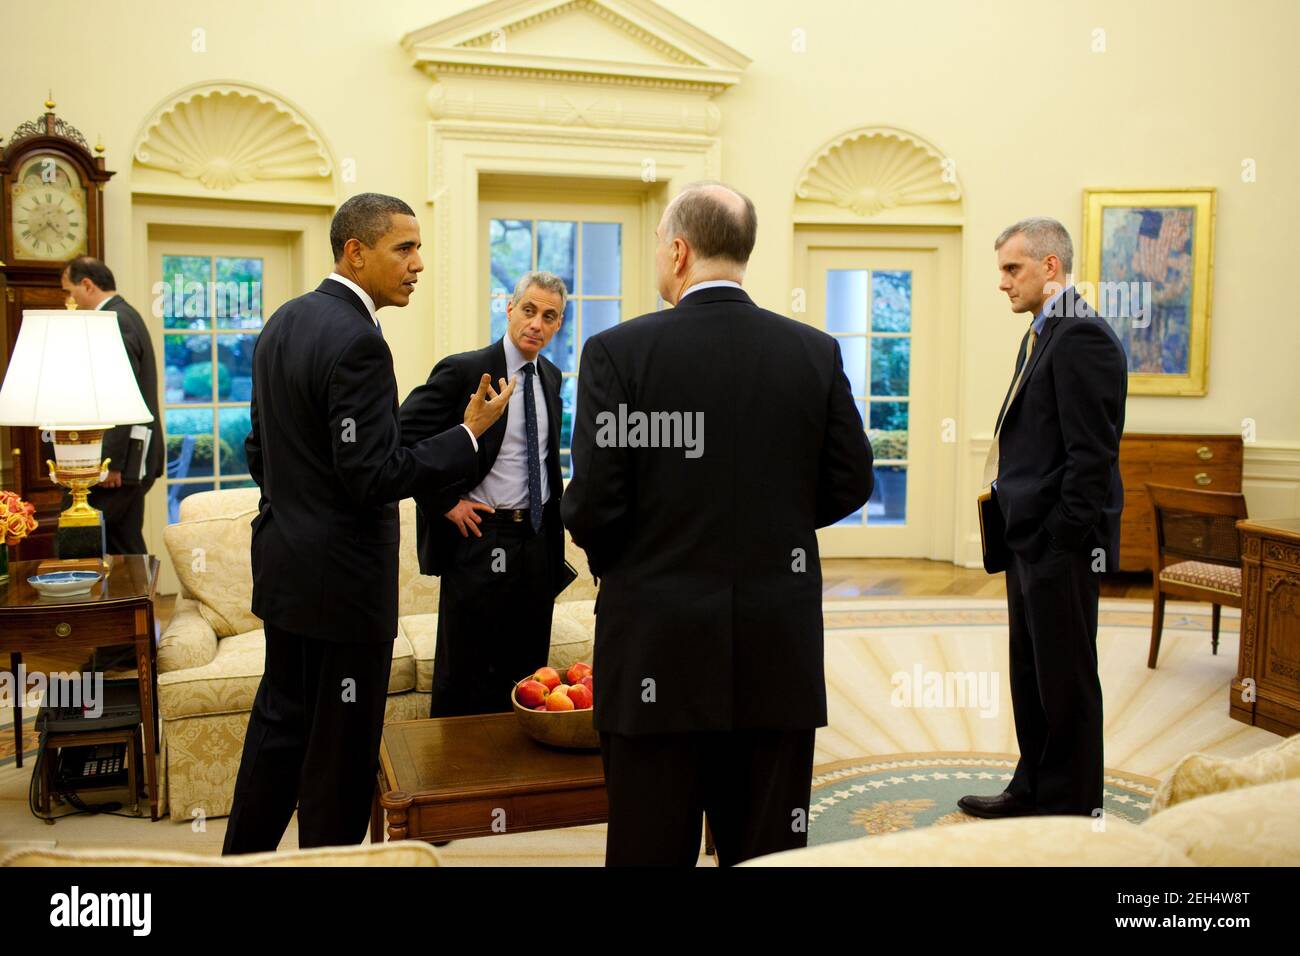 President Barack Obama talks with, left to right, Chief of Staff Rahm Emanuel, Deputy National Security Advisor Tom Donilon and  NSC Chief of Staff Denis McDonough in the Oval Office, Oct. 28, 2009. Stock Photo